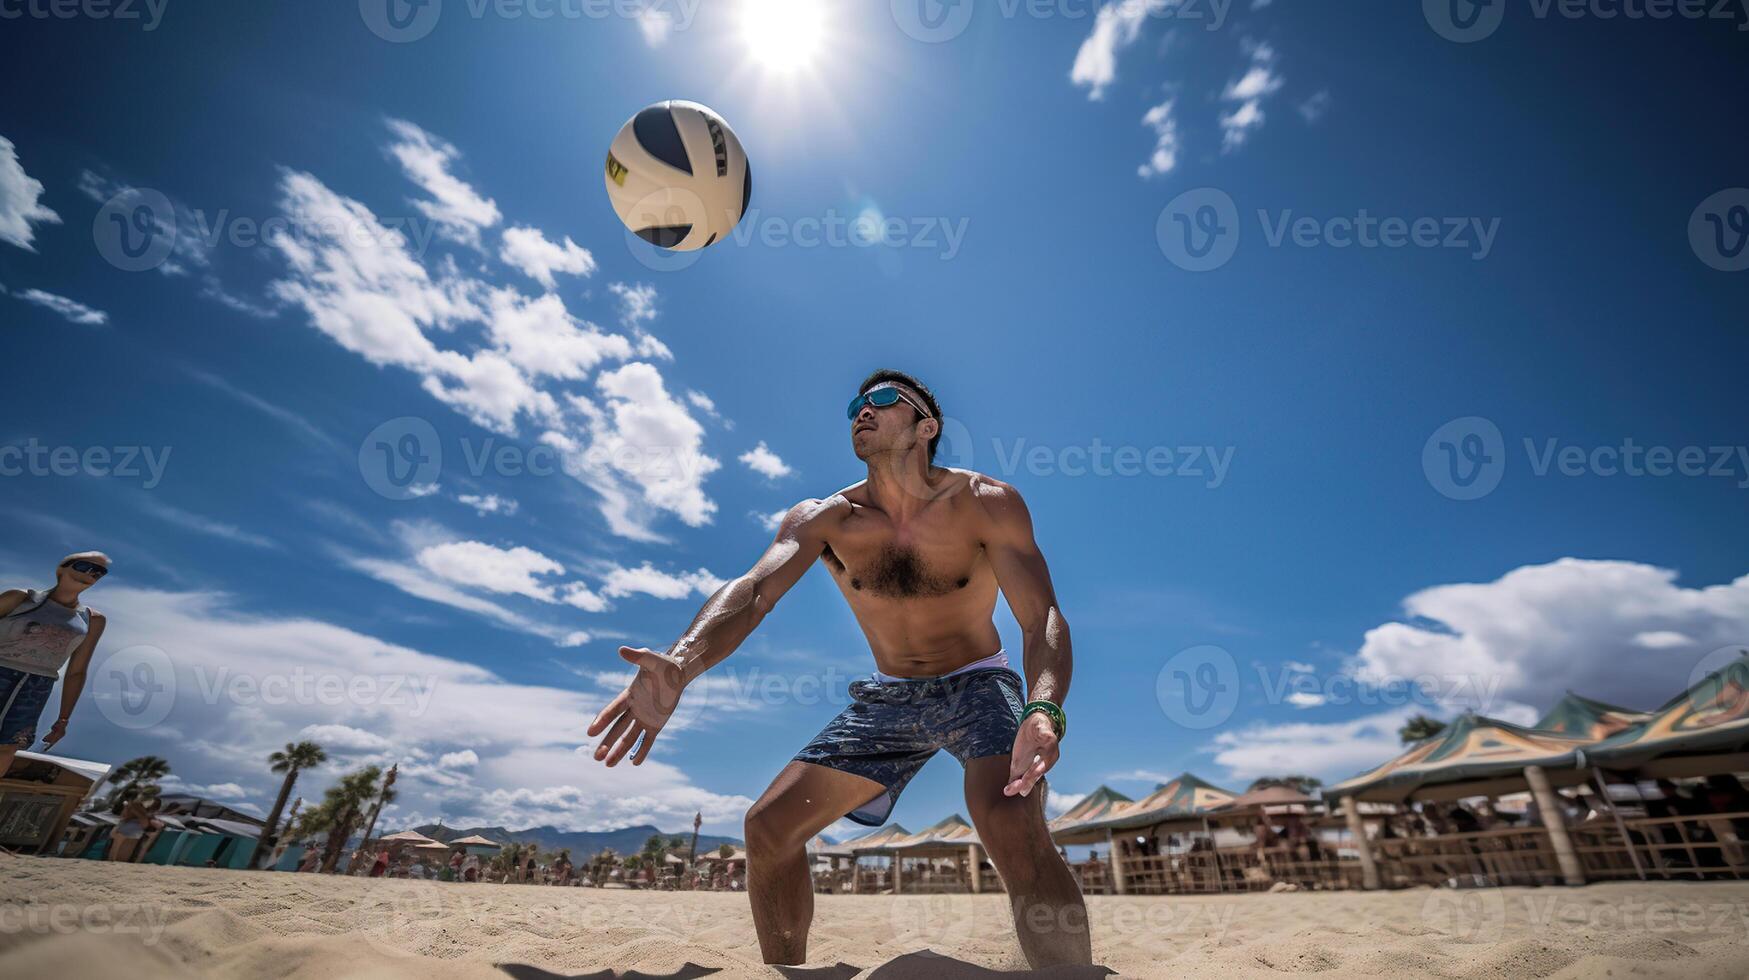 Beach volleyball player in action at sunny day under blue sky, photo